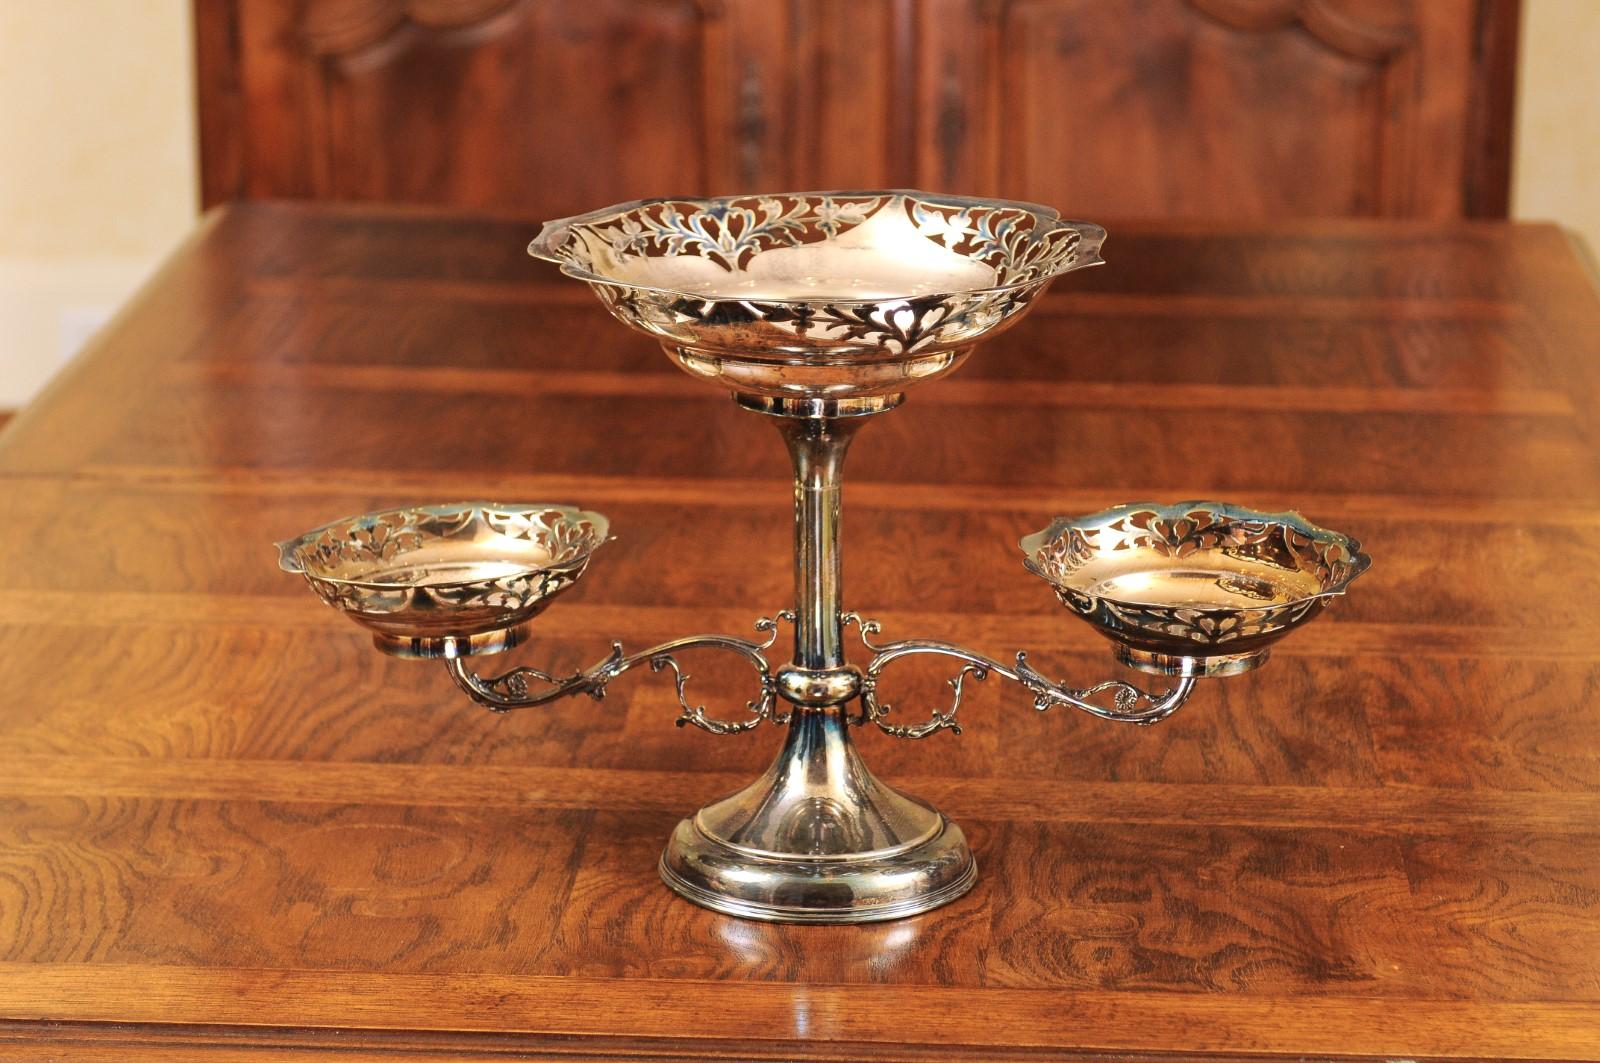 French 19th Century Silver Epergne with Pierced Foliage and Scrolling Motifs For Sale 1